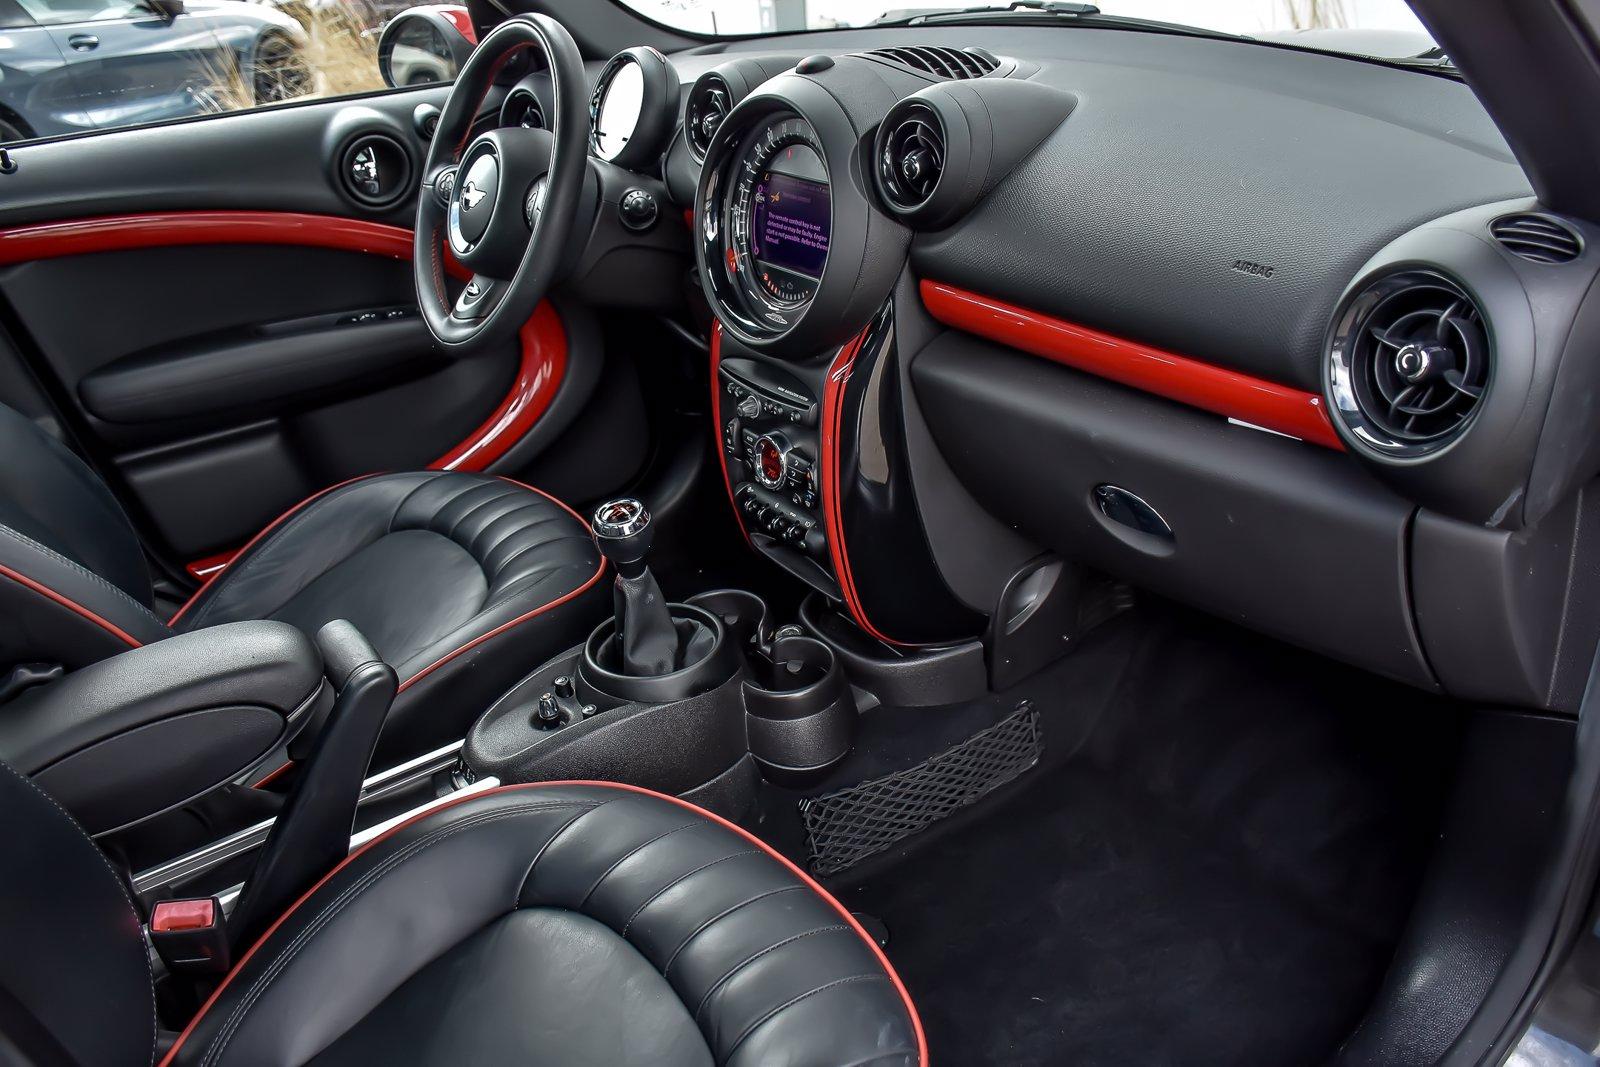 Used 2016 MINI Cooper Countryman John Cooper Works Premium With Navigation | Downers Grove, IL